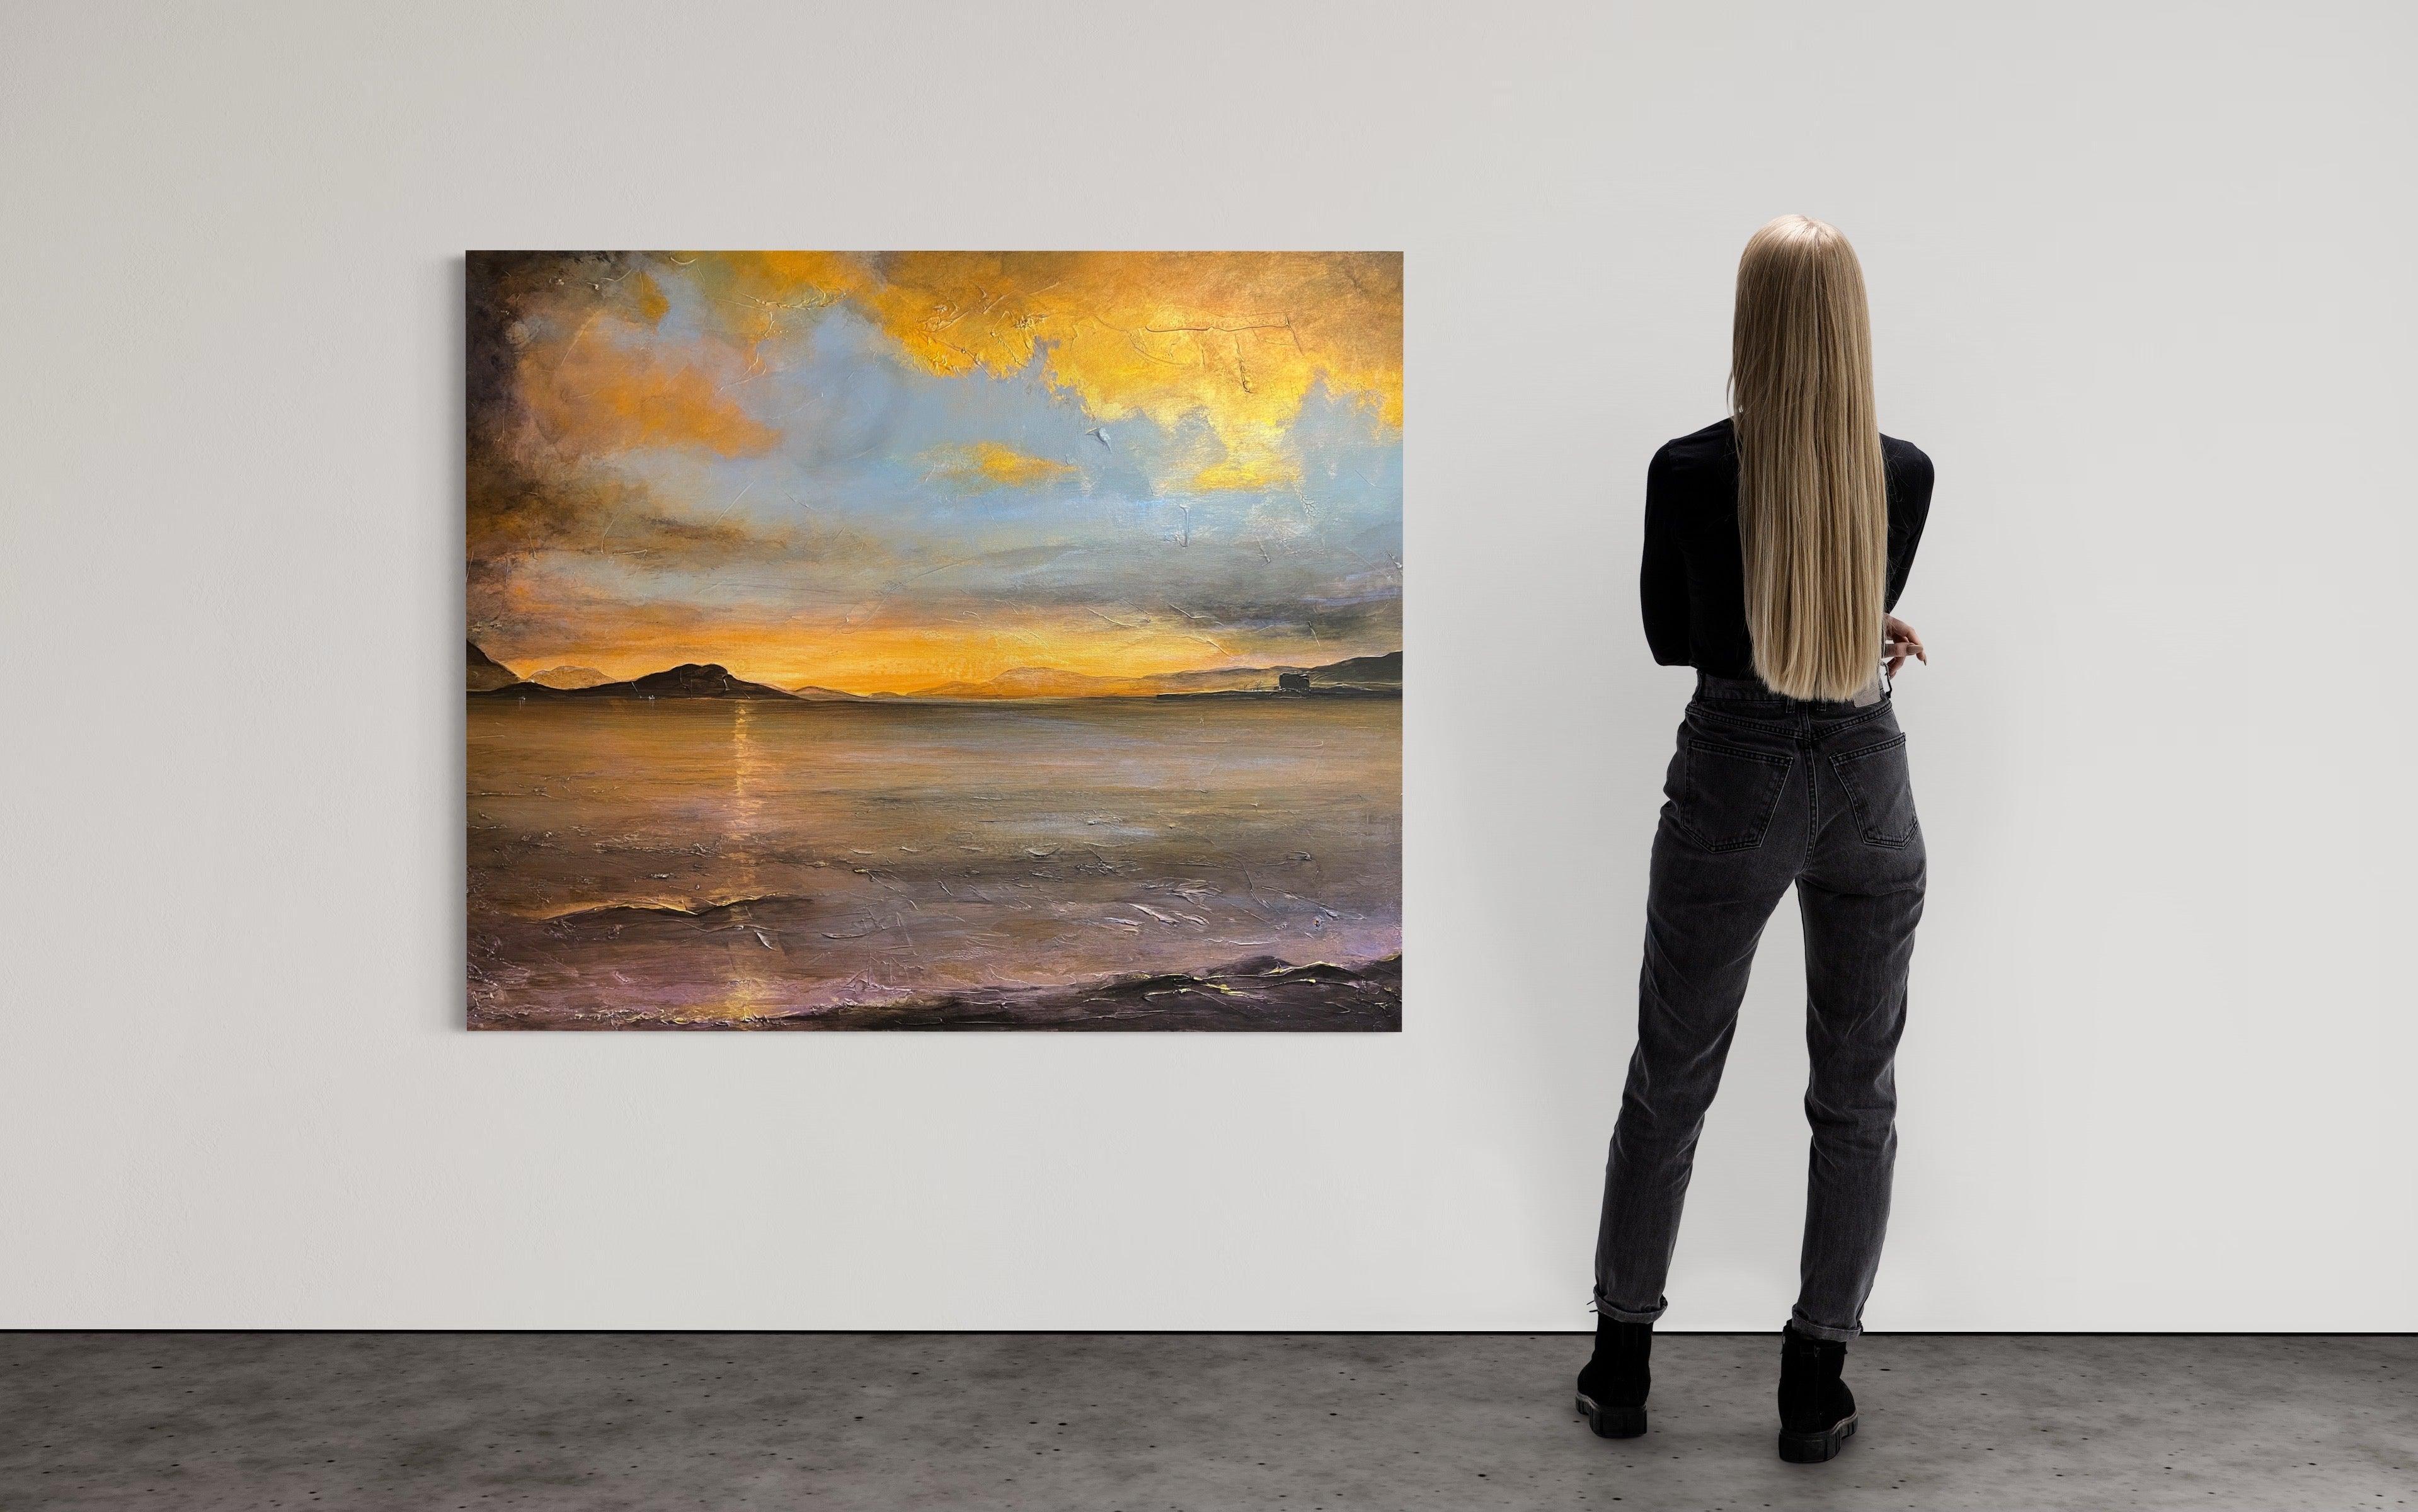 Loch Linnhe Sunset 60x50 inch Stretched Canvas Statement Wall Art-Statement Wall Art-Scottish Lochs & Mountains Art Gallery-Paintings, Prints, Homeware, Art Gifts From Scotland By Scottish Artist Kevin Hunter